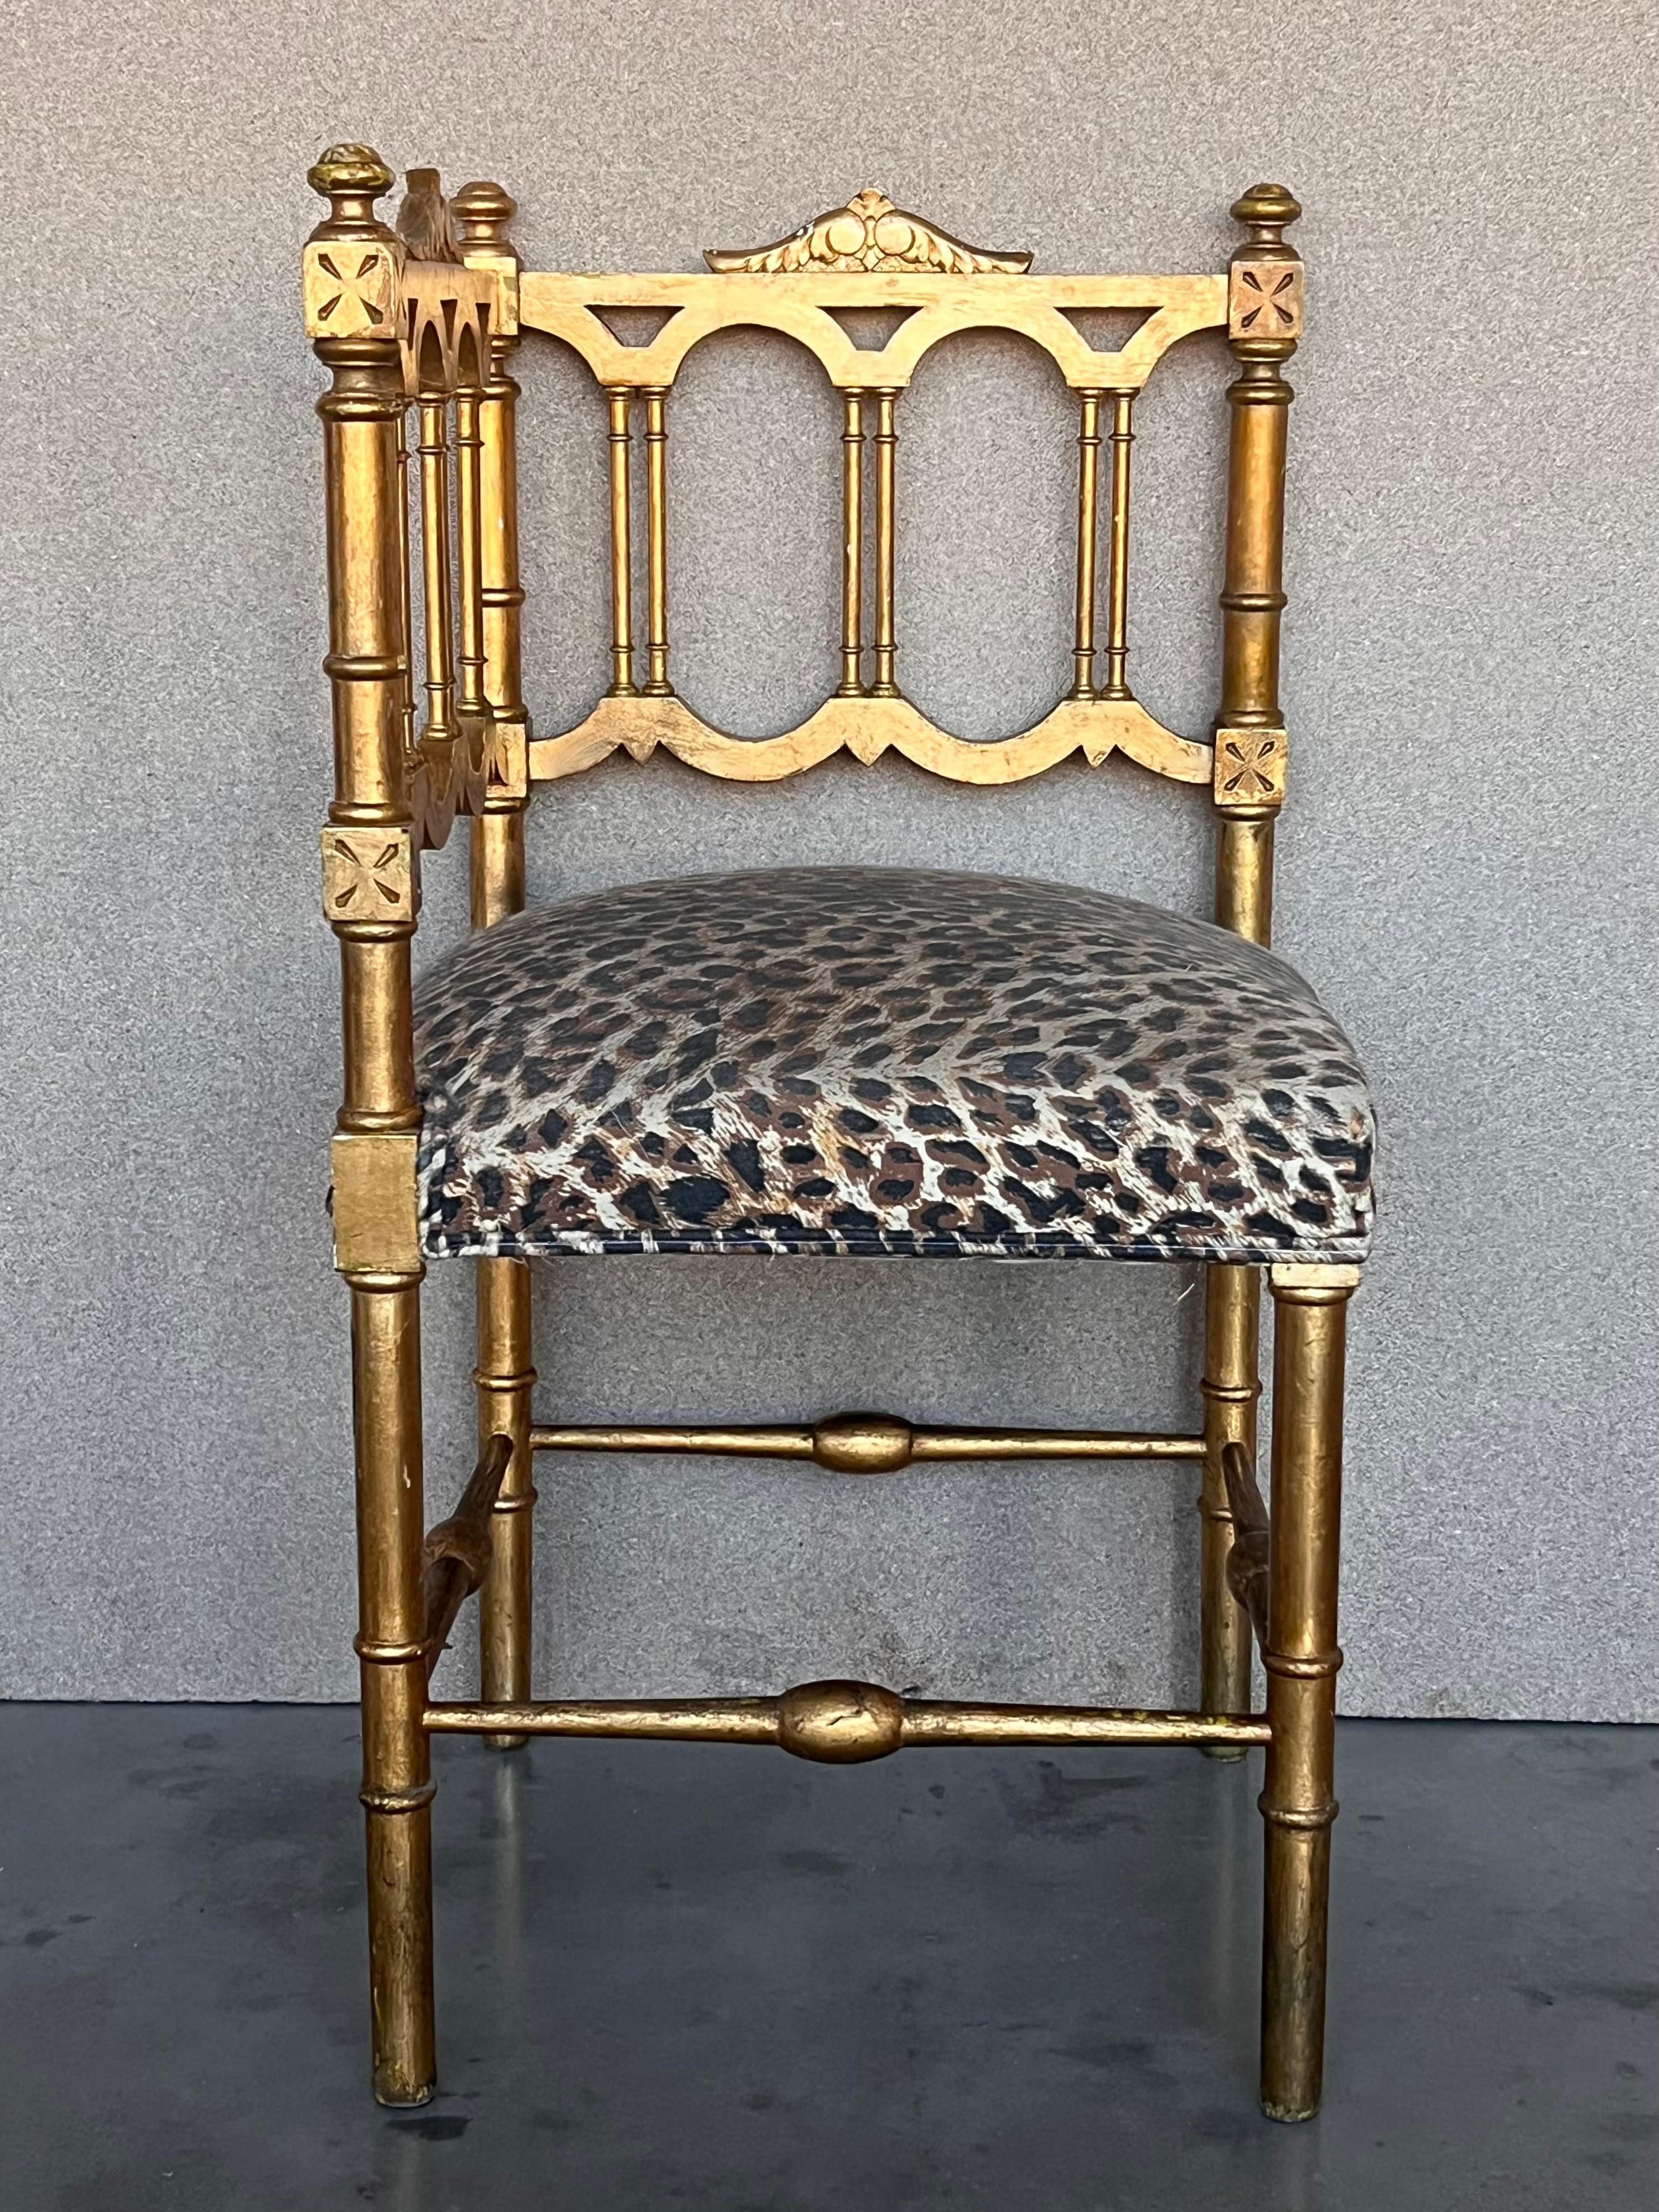 A charming pair of French Provincial gilded wood corner chairs. Beautifully carved walnut frames and new upholtered seats, sturdy and strong and in good antique condition. Stylish, eye-catching chairs would make a fabulous addition to any eclectic